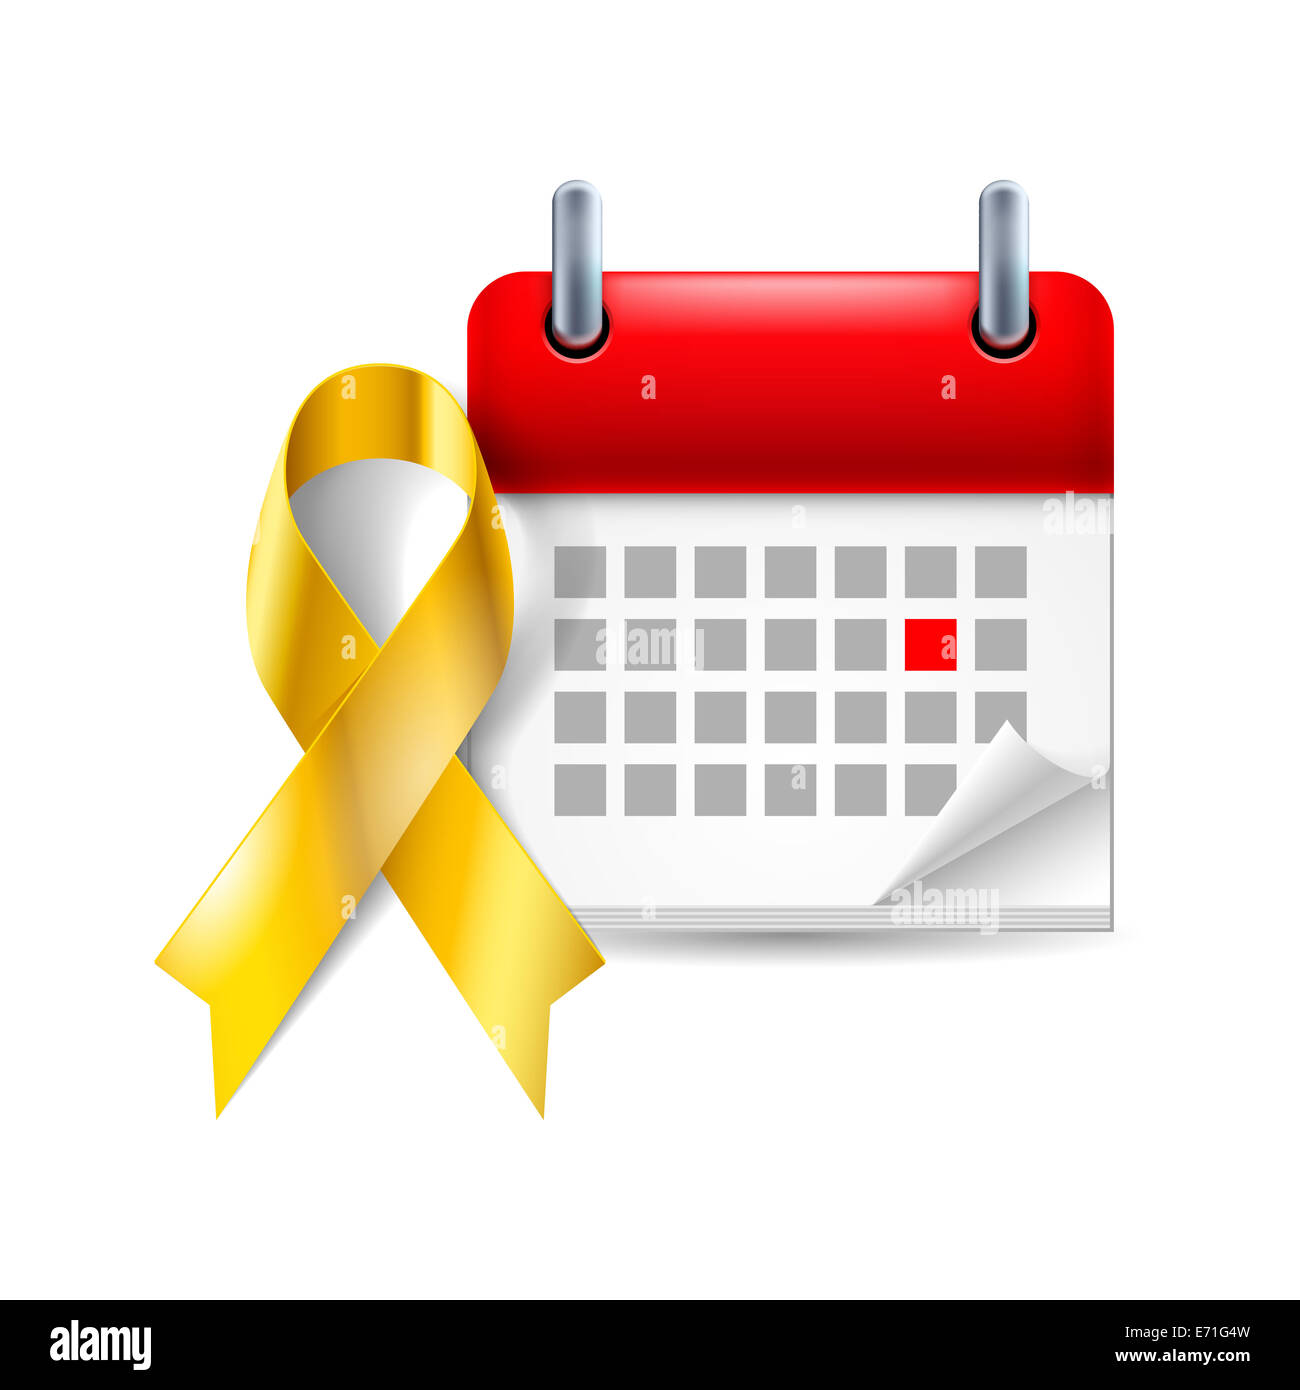 Gold awareness ribbon and calendar with marked day. Childhood cancer symbol Stock Photo